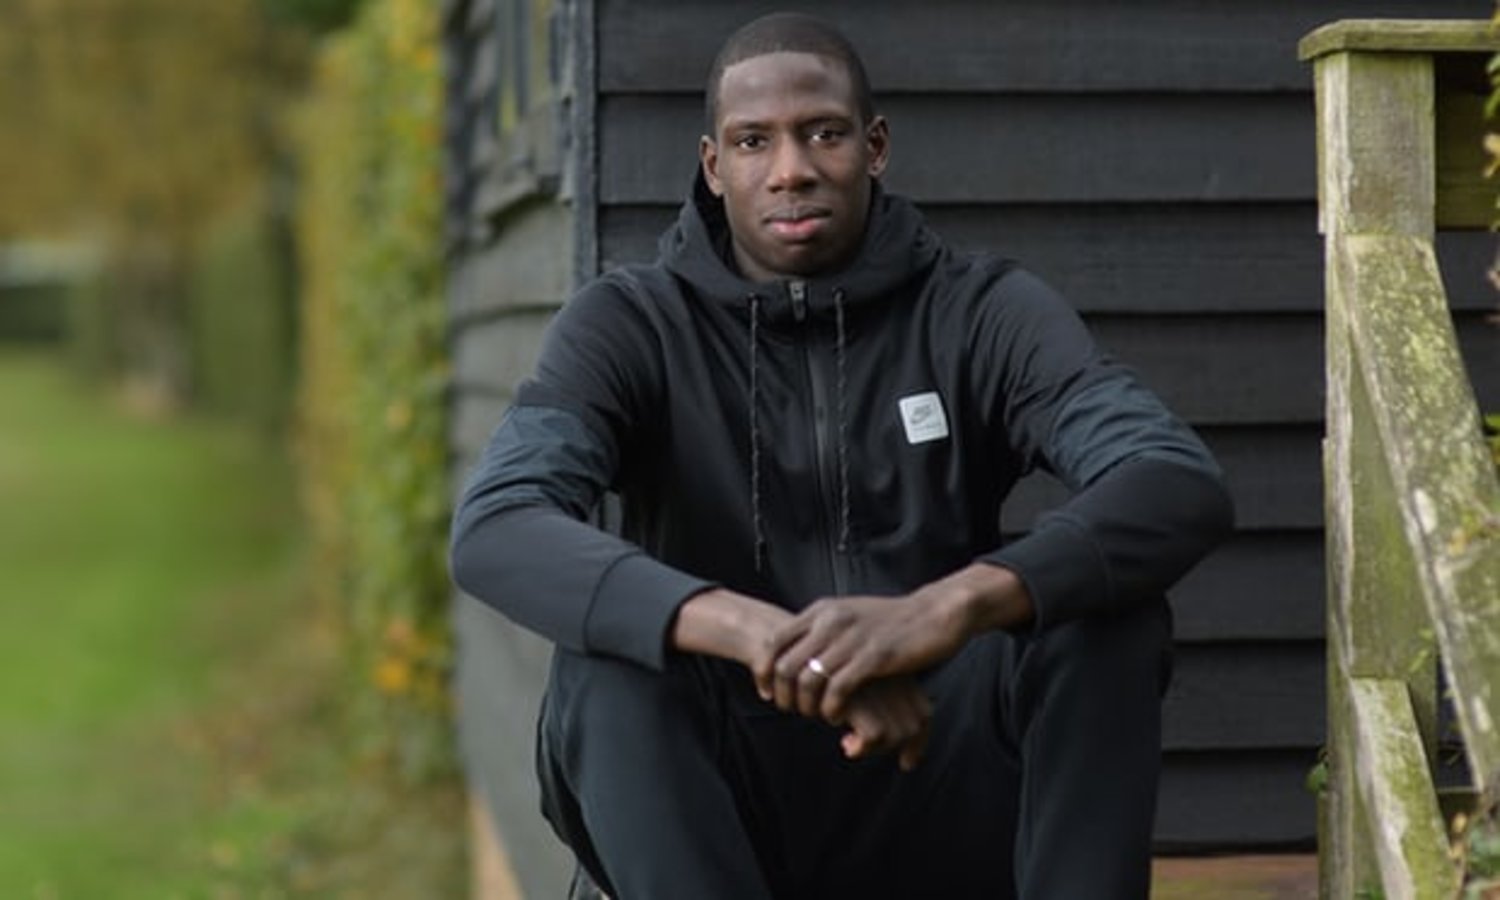  Abdoulaye Doucouré’s footballing determination was apparent from a young age, when he lobbied for more facilities in his Paris suburb. Photograph: Christian Sinibaldi/Christian Sinibaldi for the Guardian
